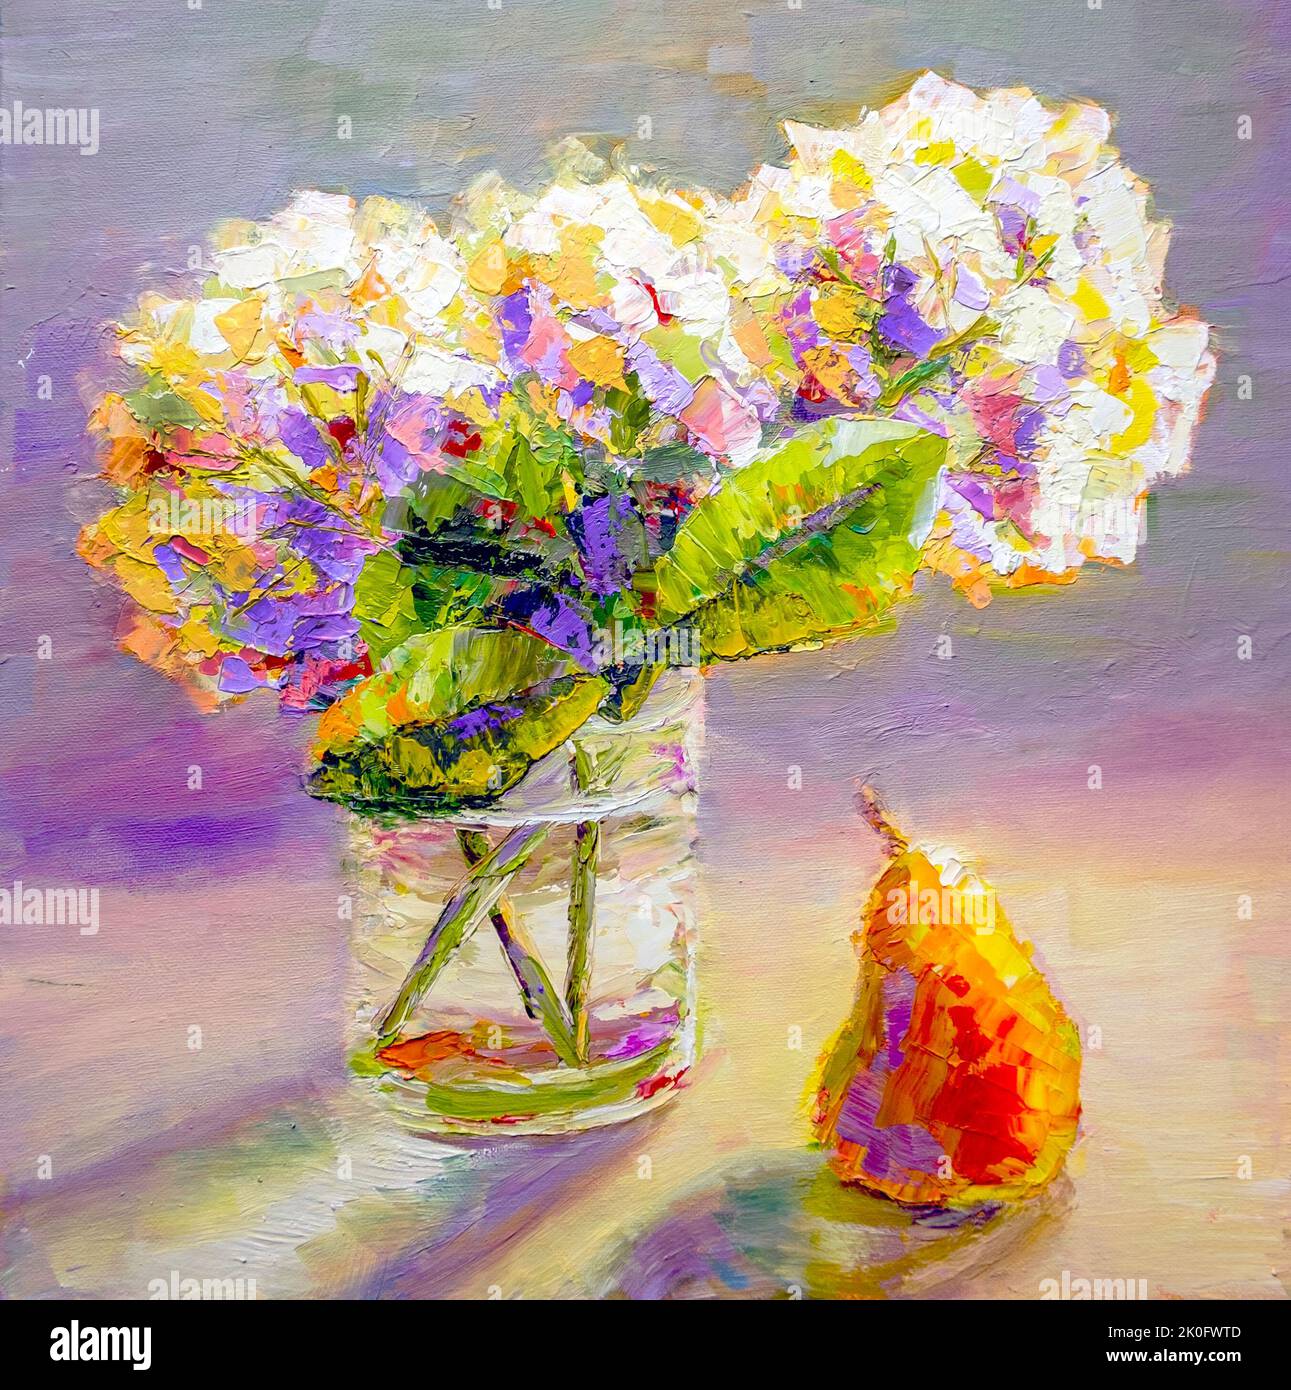 Sunny flowers in vase with pear. Still life art, oil painting on canvas Stock Photo